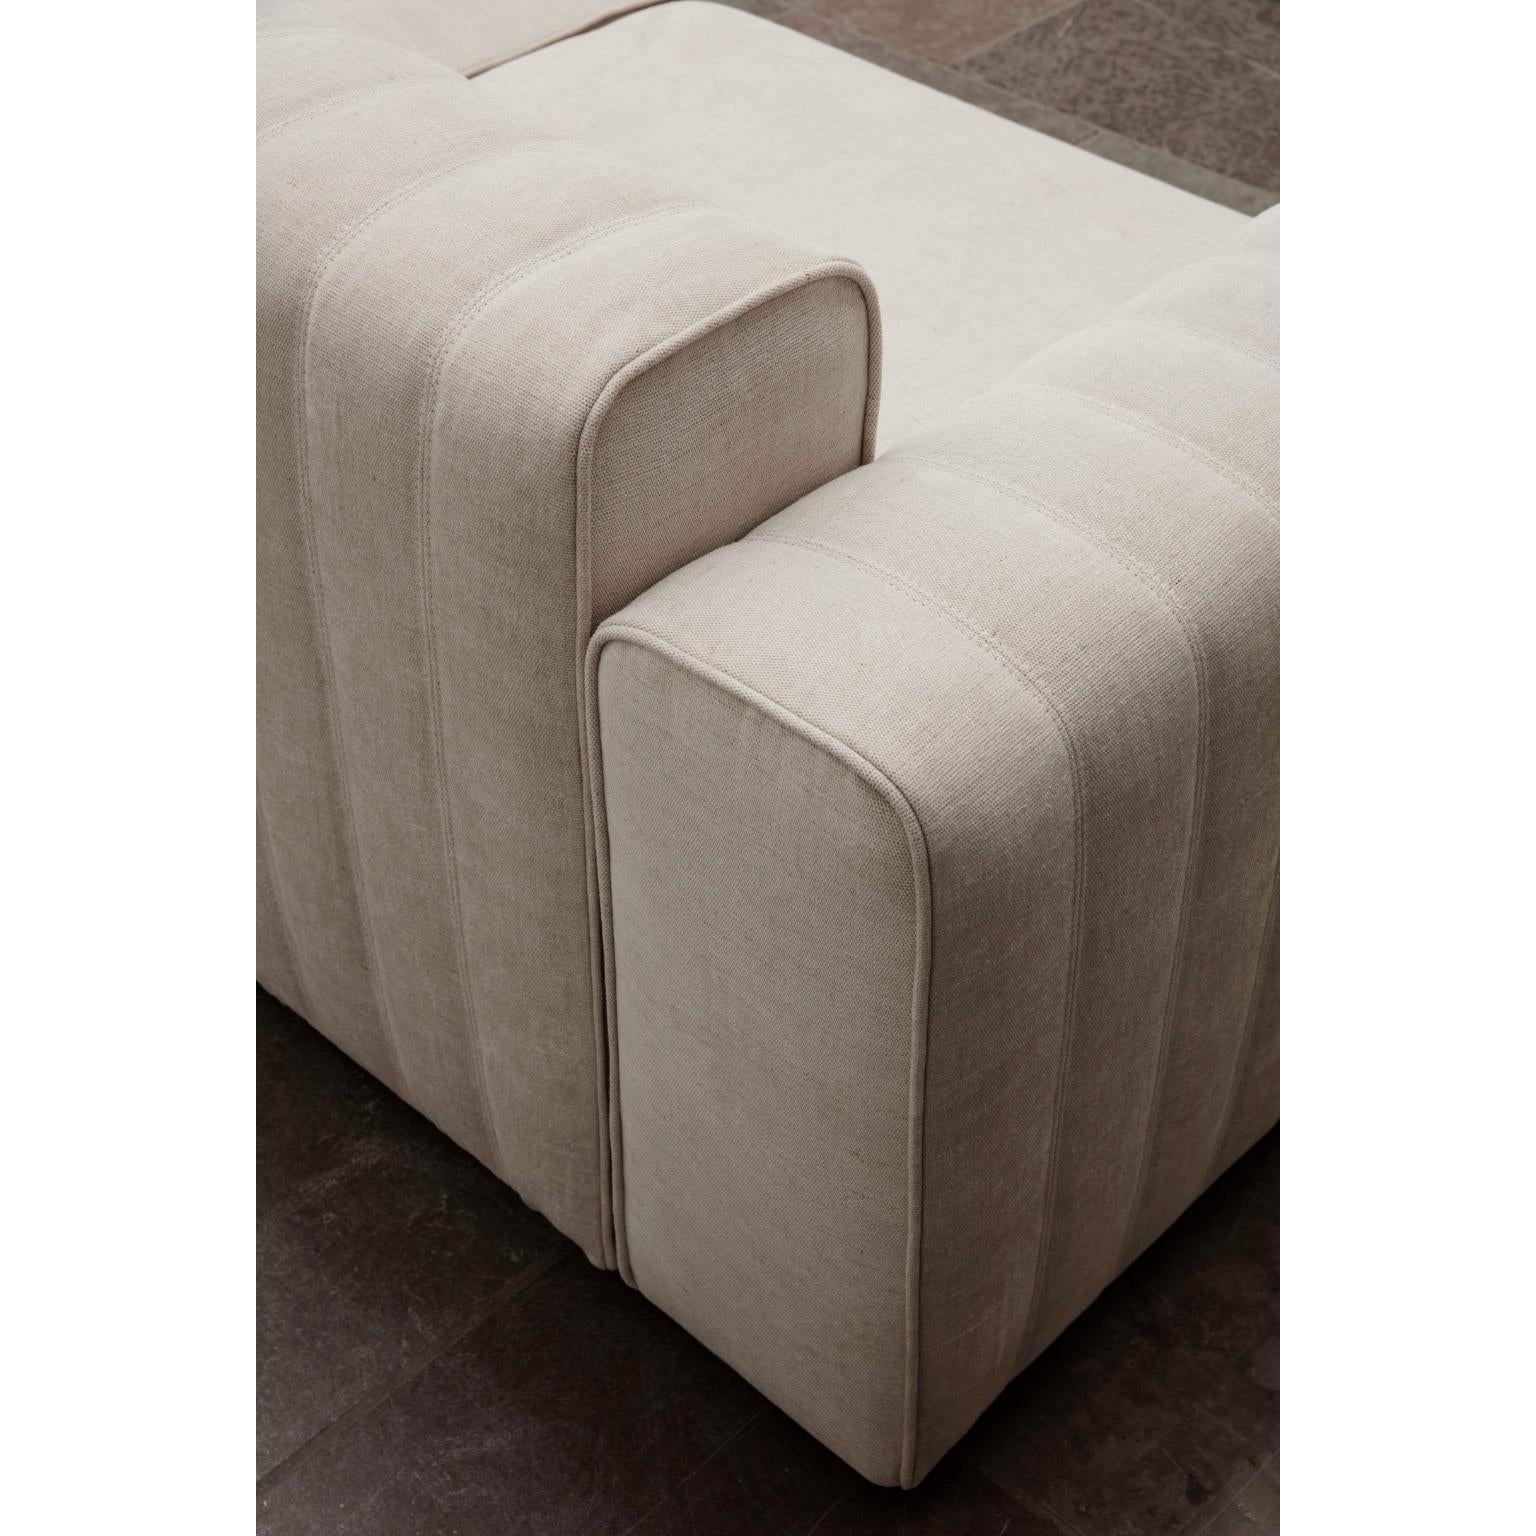 Riff Sofa by NORR11
Dimensions: D 92 x W 197 x H 70 cm. SH: 42 cm.
Materials: Foam, plywood and upholstery.
Upholstery: Barnum Boucle Color 3.

Available in a variety of fabrics and custom materials. Prices may vary. Deep seating and generous